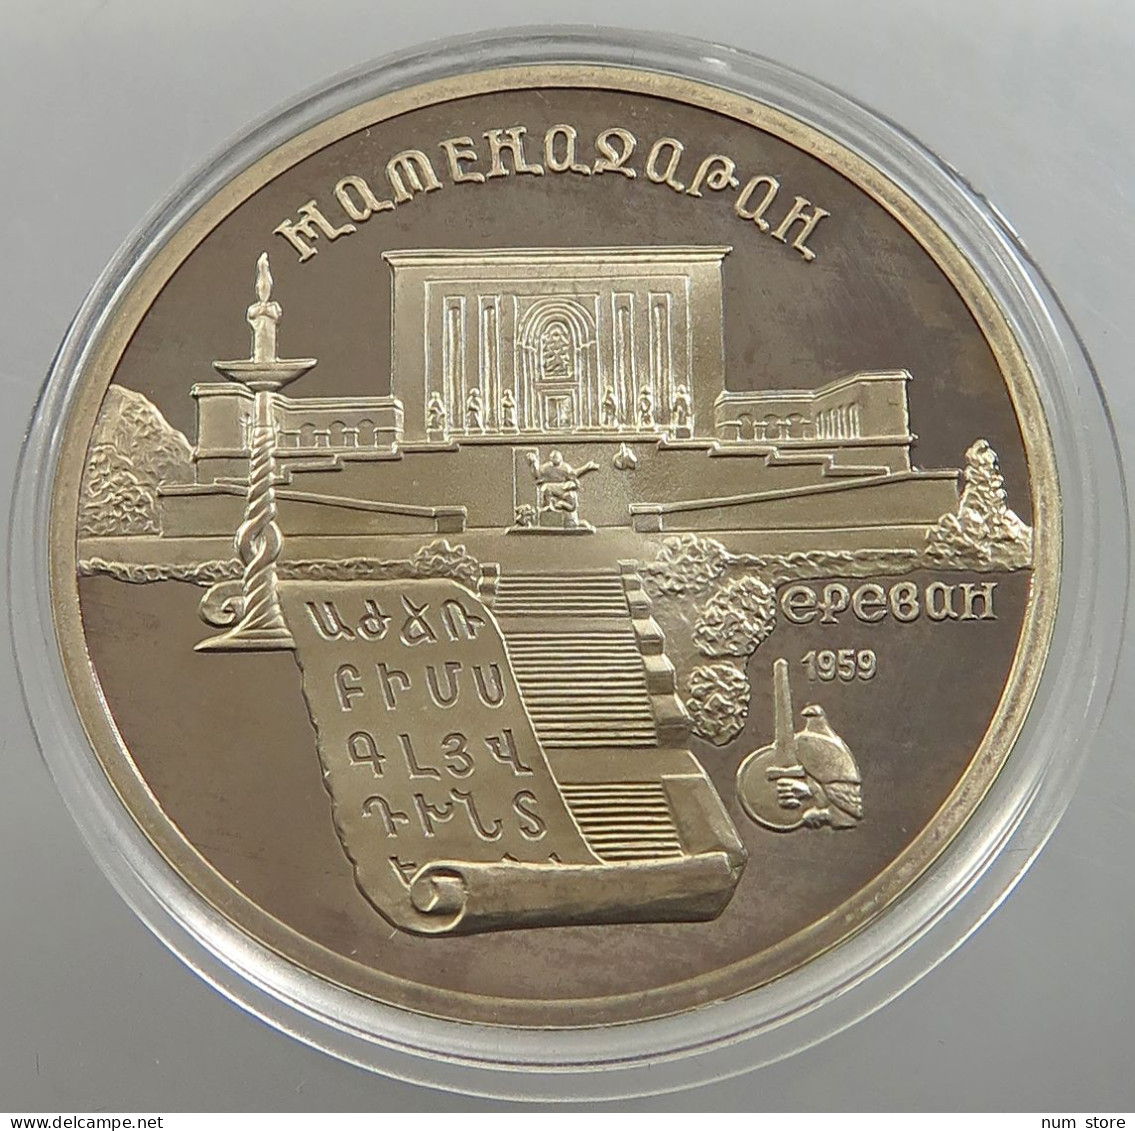 RUSSIA USSR 5 ROUBLES 1990 PROOF #sm14 0405 - Russie